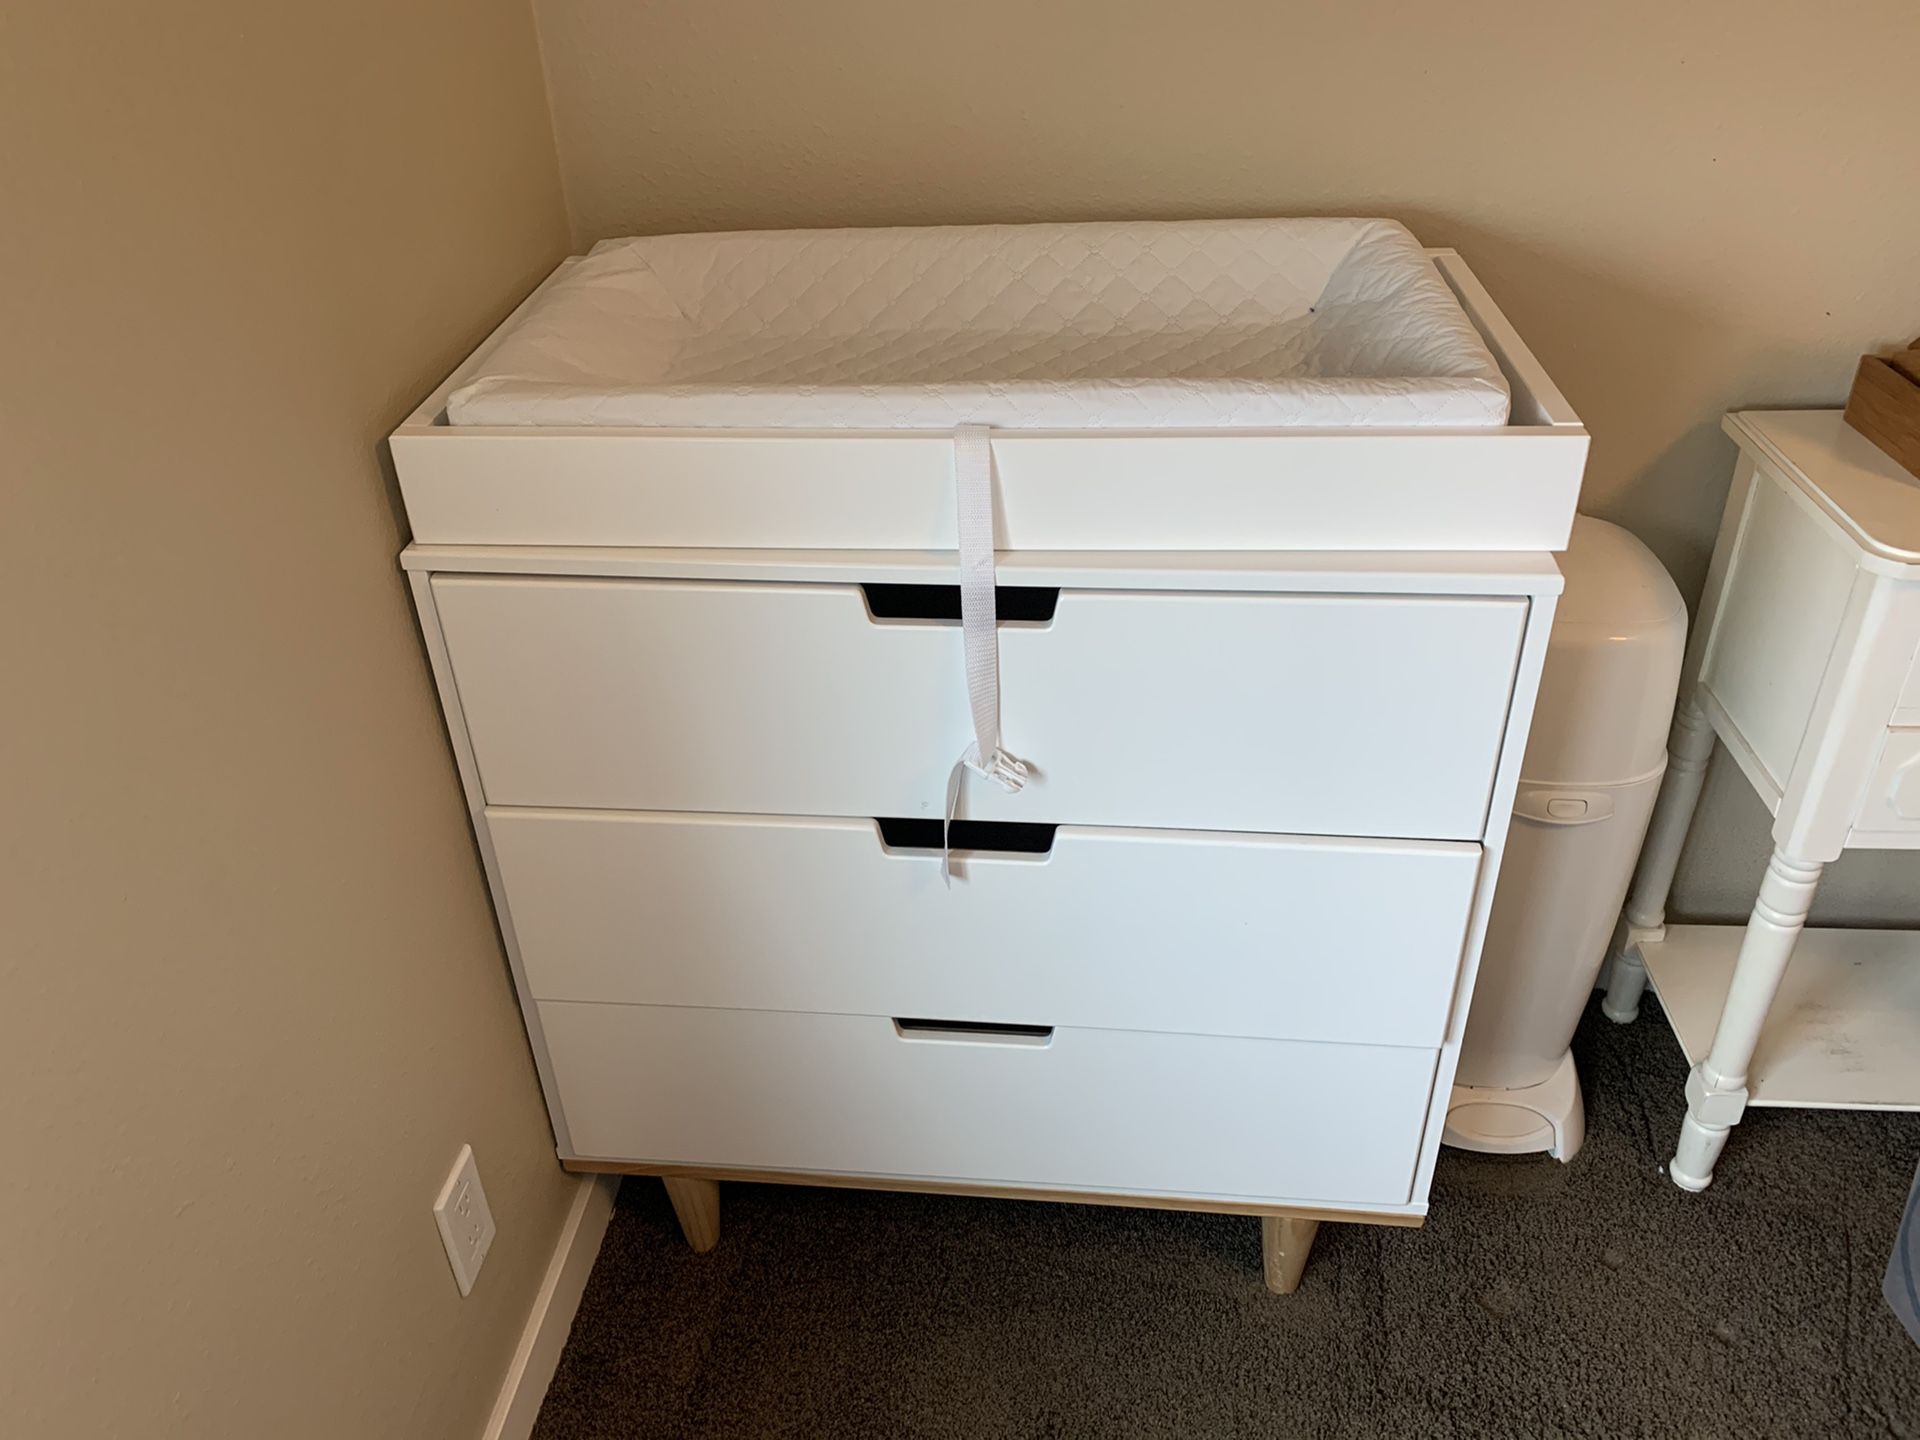 New baby changing Table complete